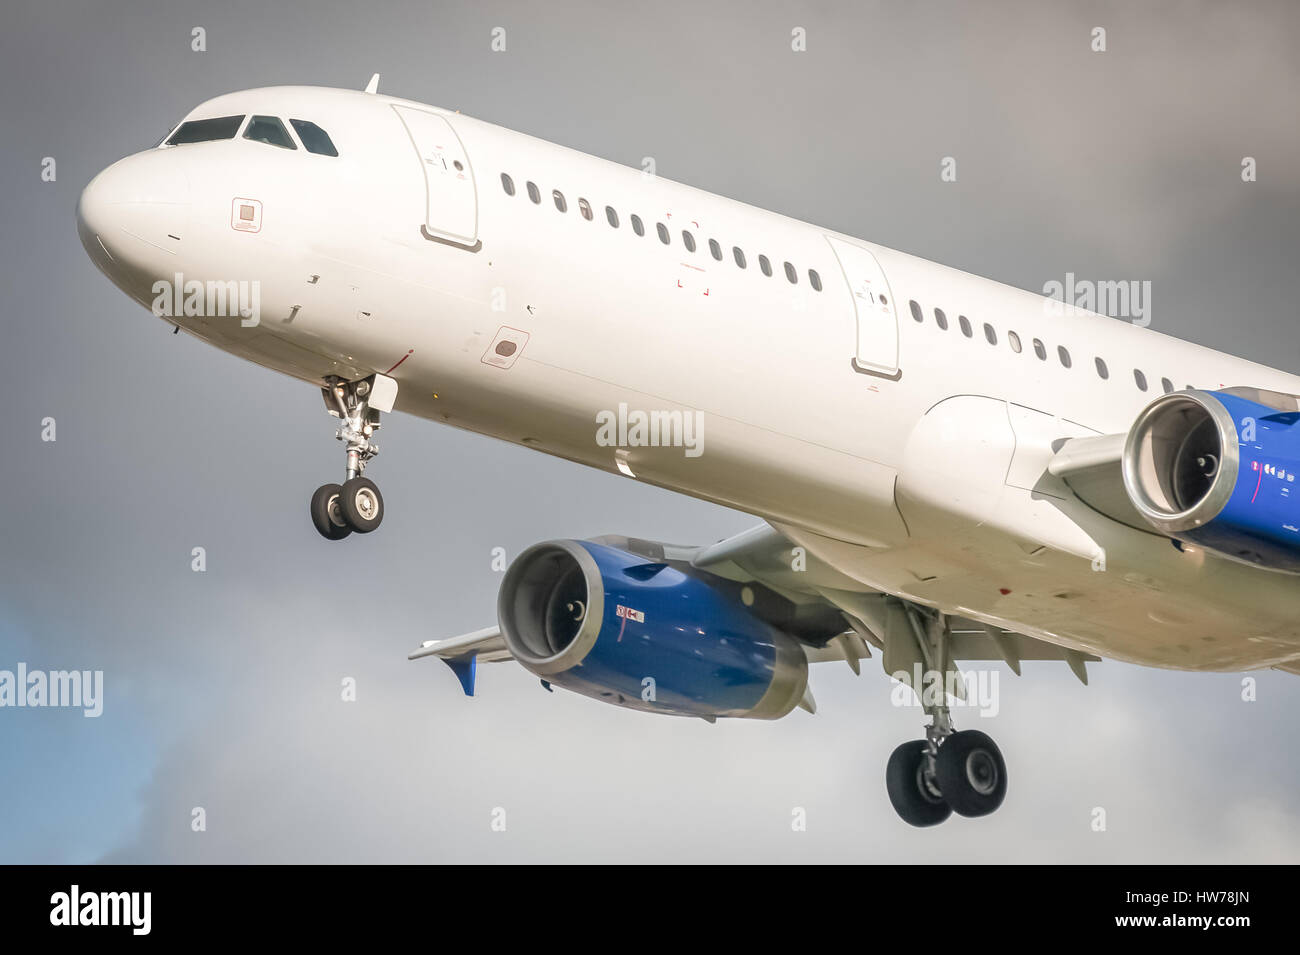 closeup of an unmarked passenger aircraft about to land Stock Photo